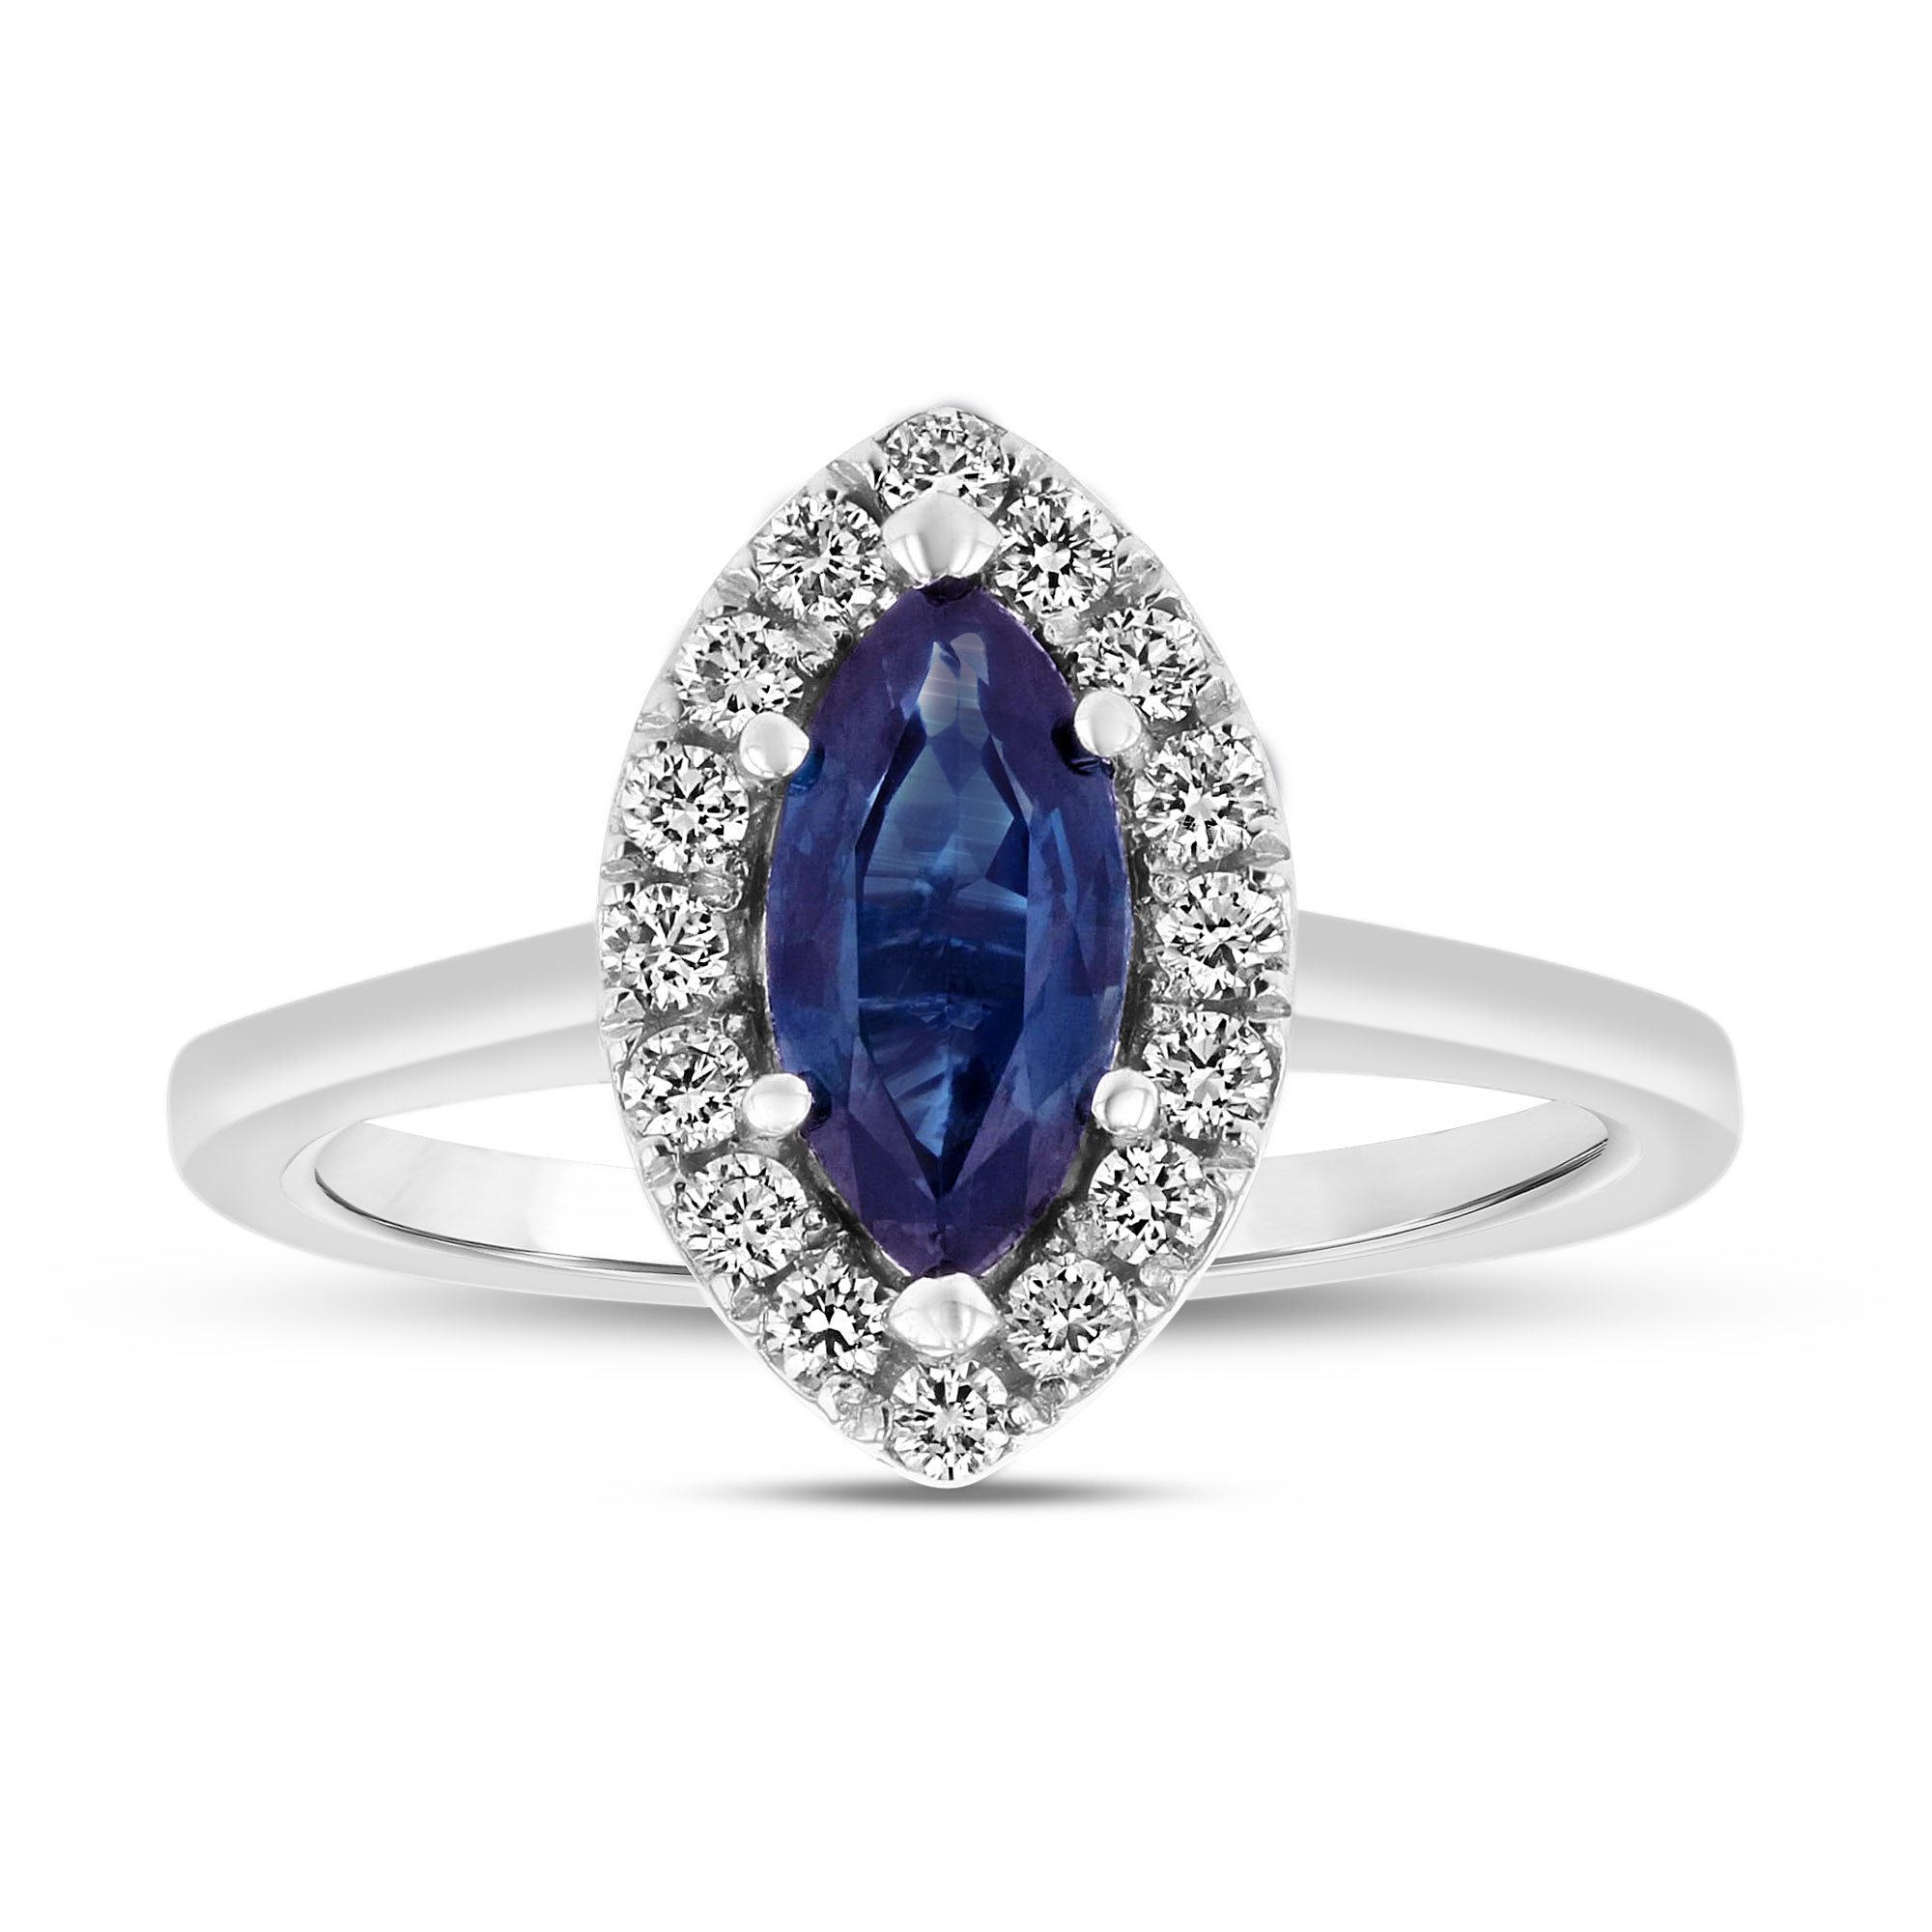 1.37ctw Diamond and Sapphire Ring in 14k White Gold